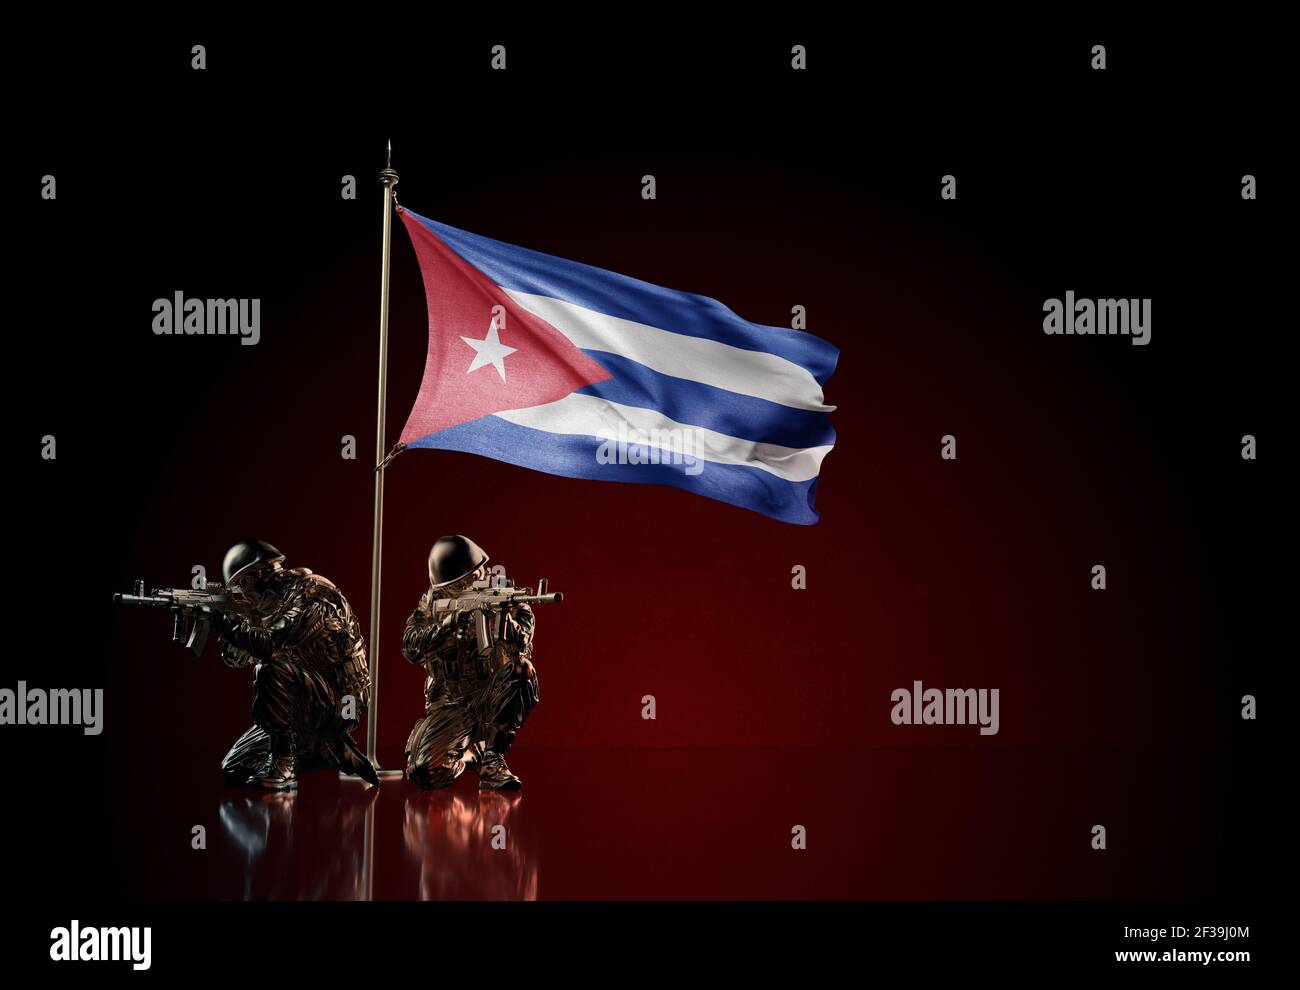 Concept of military conflict with soldier statues and waving national flag of Cuba. Illustration of coup idea. Two guards defending the symbol Stock Photo